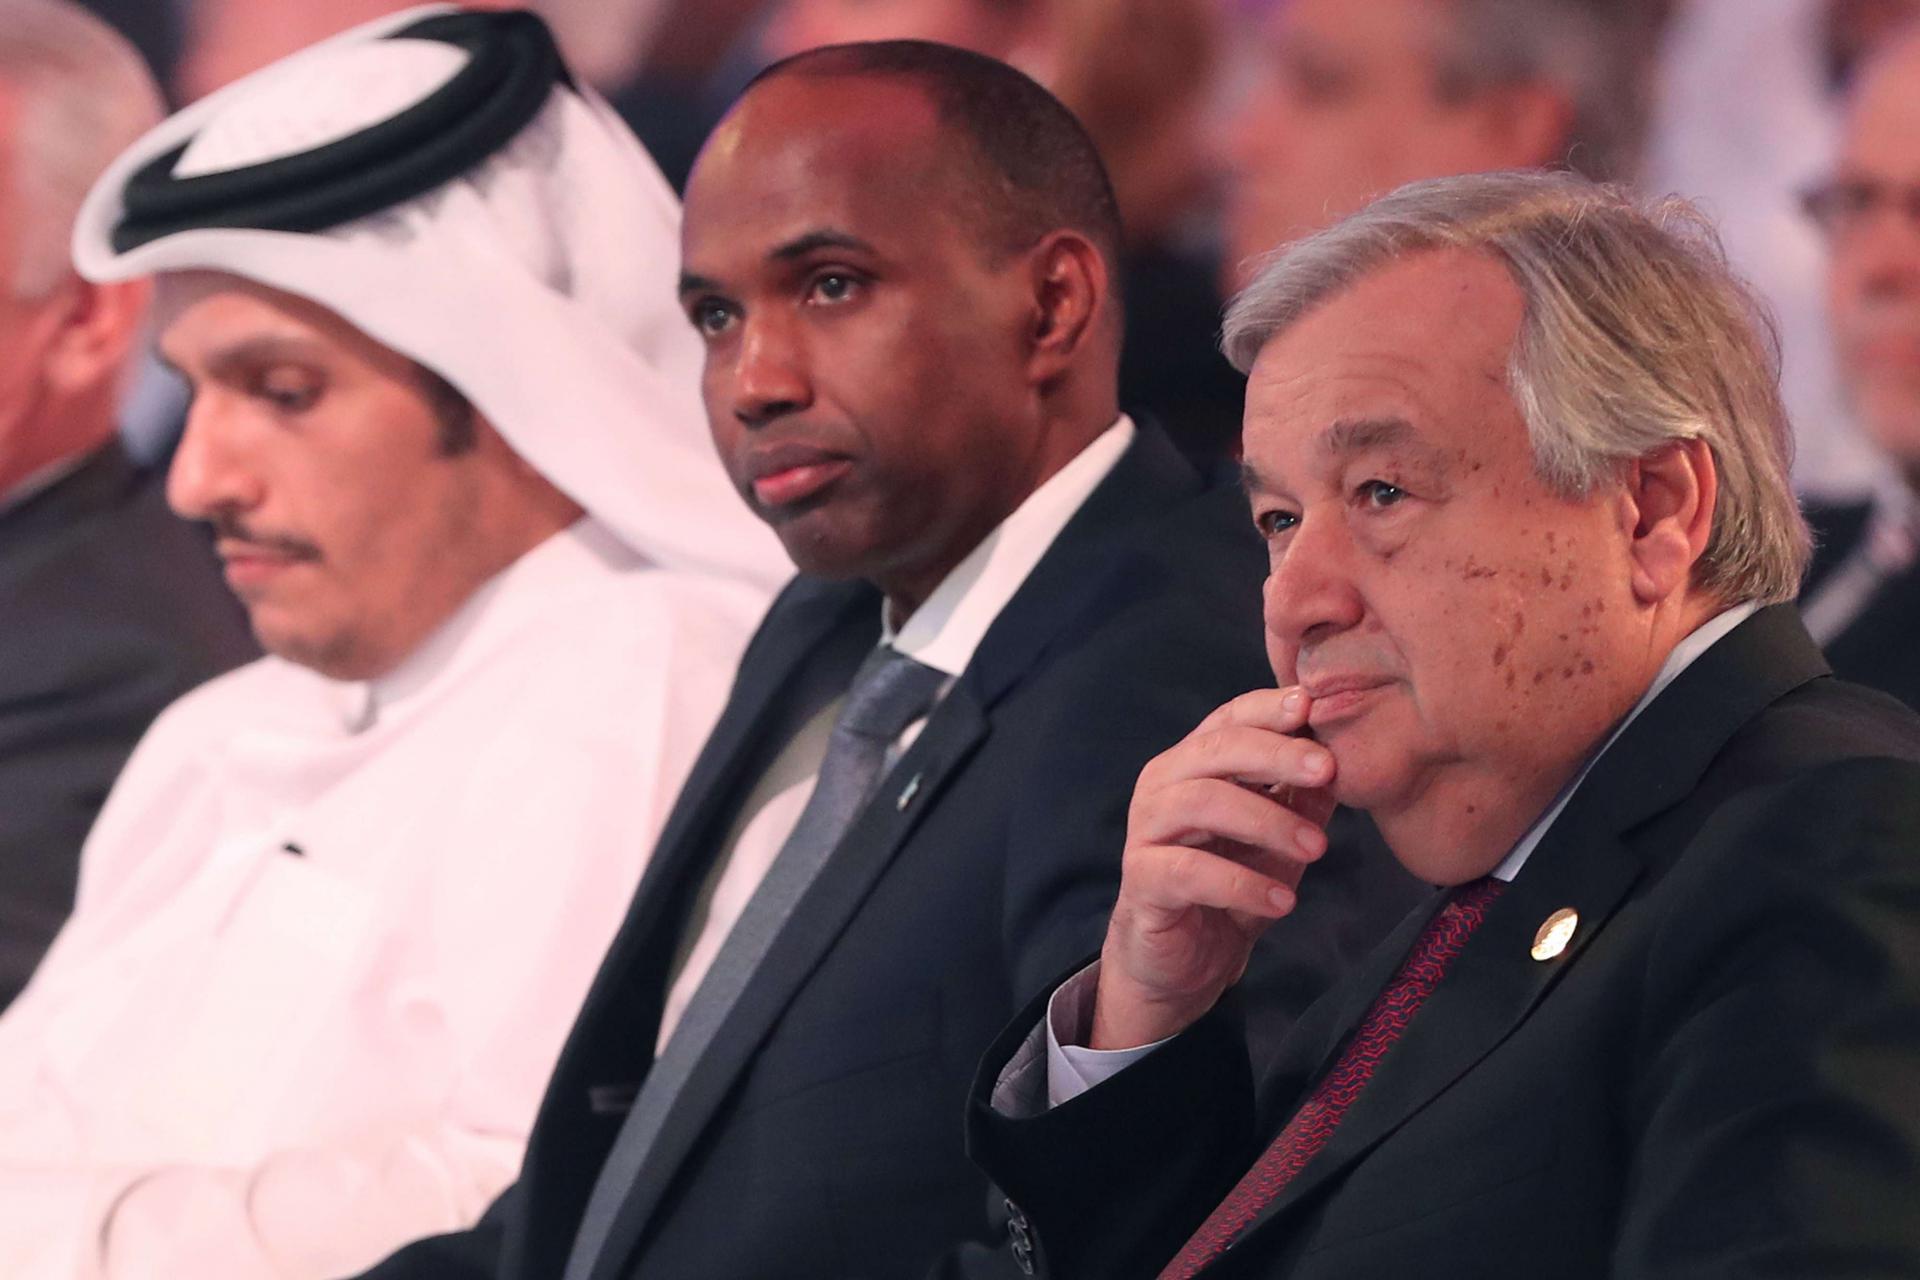 United Nations' Secretary General Antonio Guterres (R) and Somalia's Prime Minister Hassan Ali Khaire (C) attend the Doha Forum